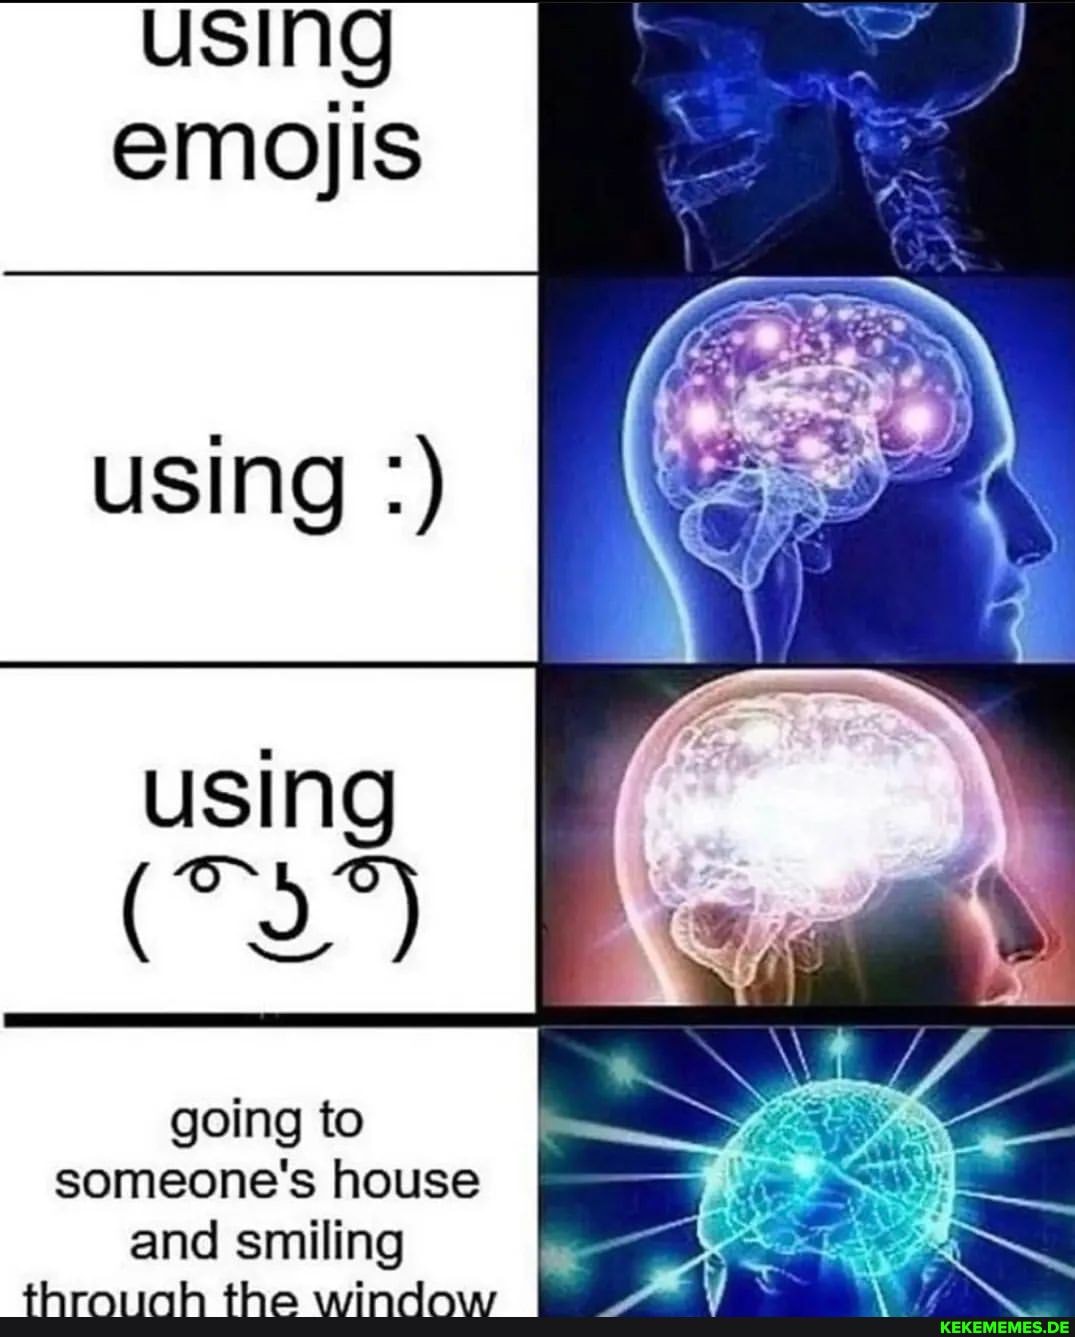 USING emojis USING I USING going to someone's house and smiling